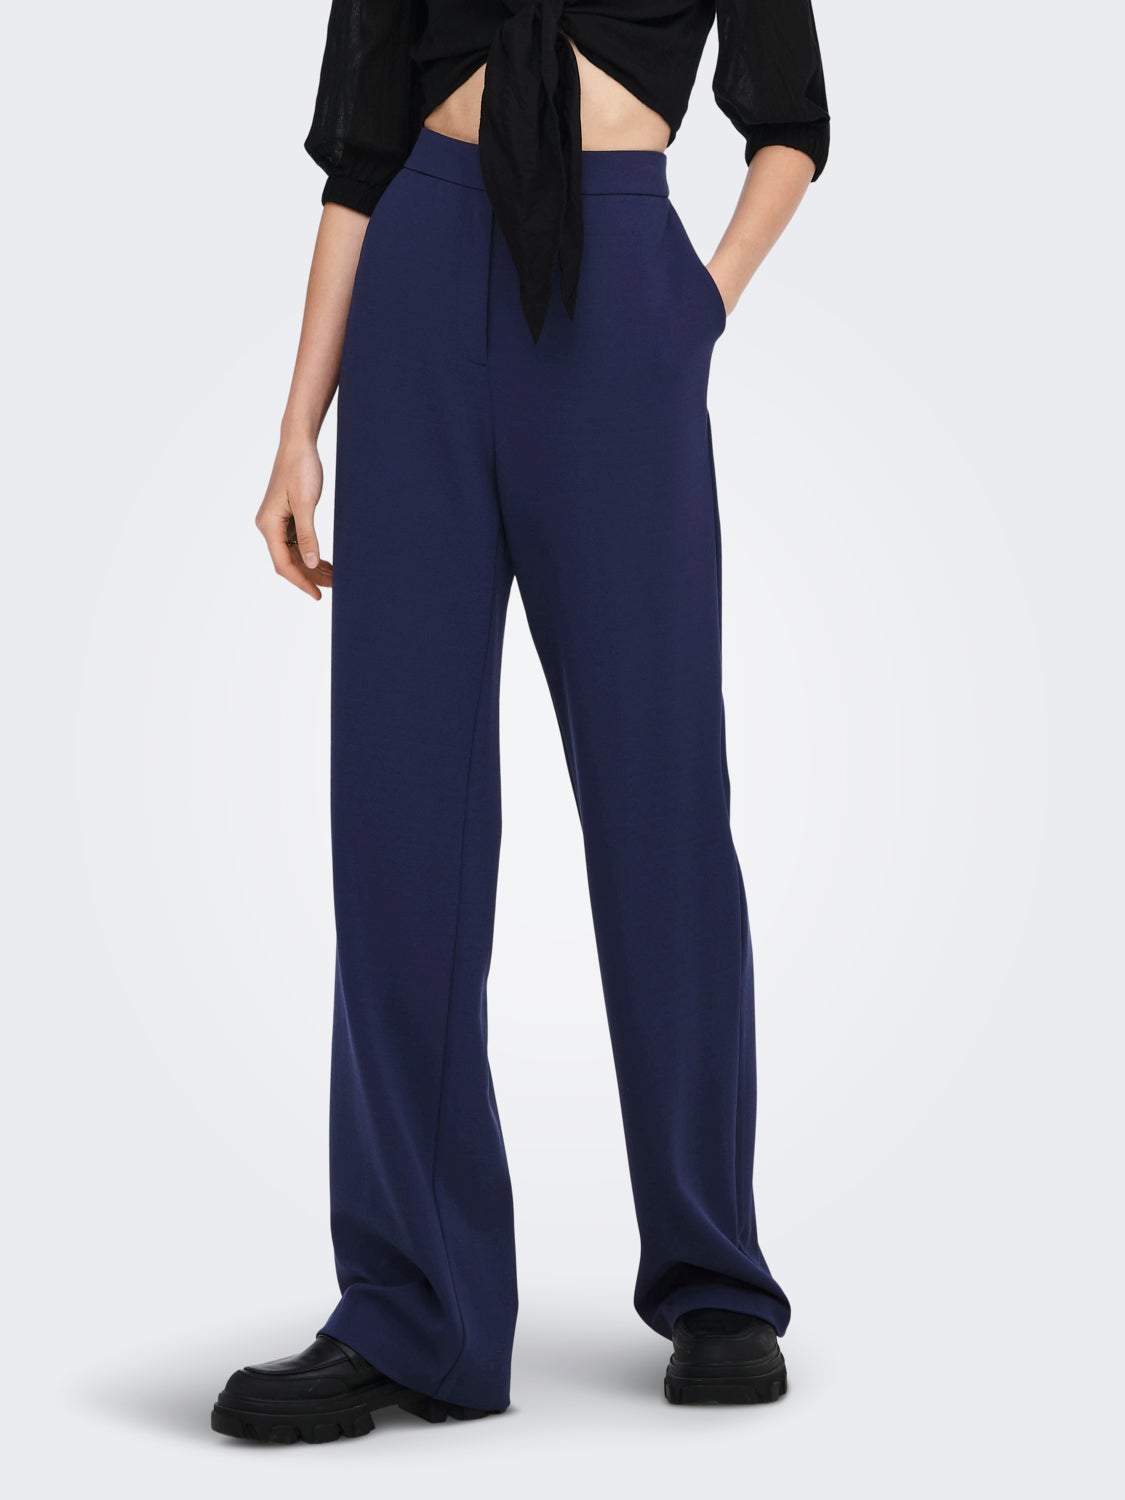 Wide Leg Pleat Pant in Blue Iris | THEORY | Muse Boutique